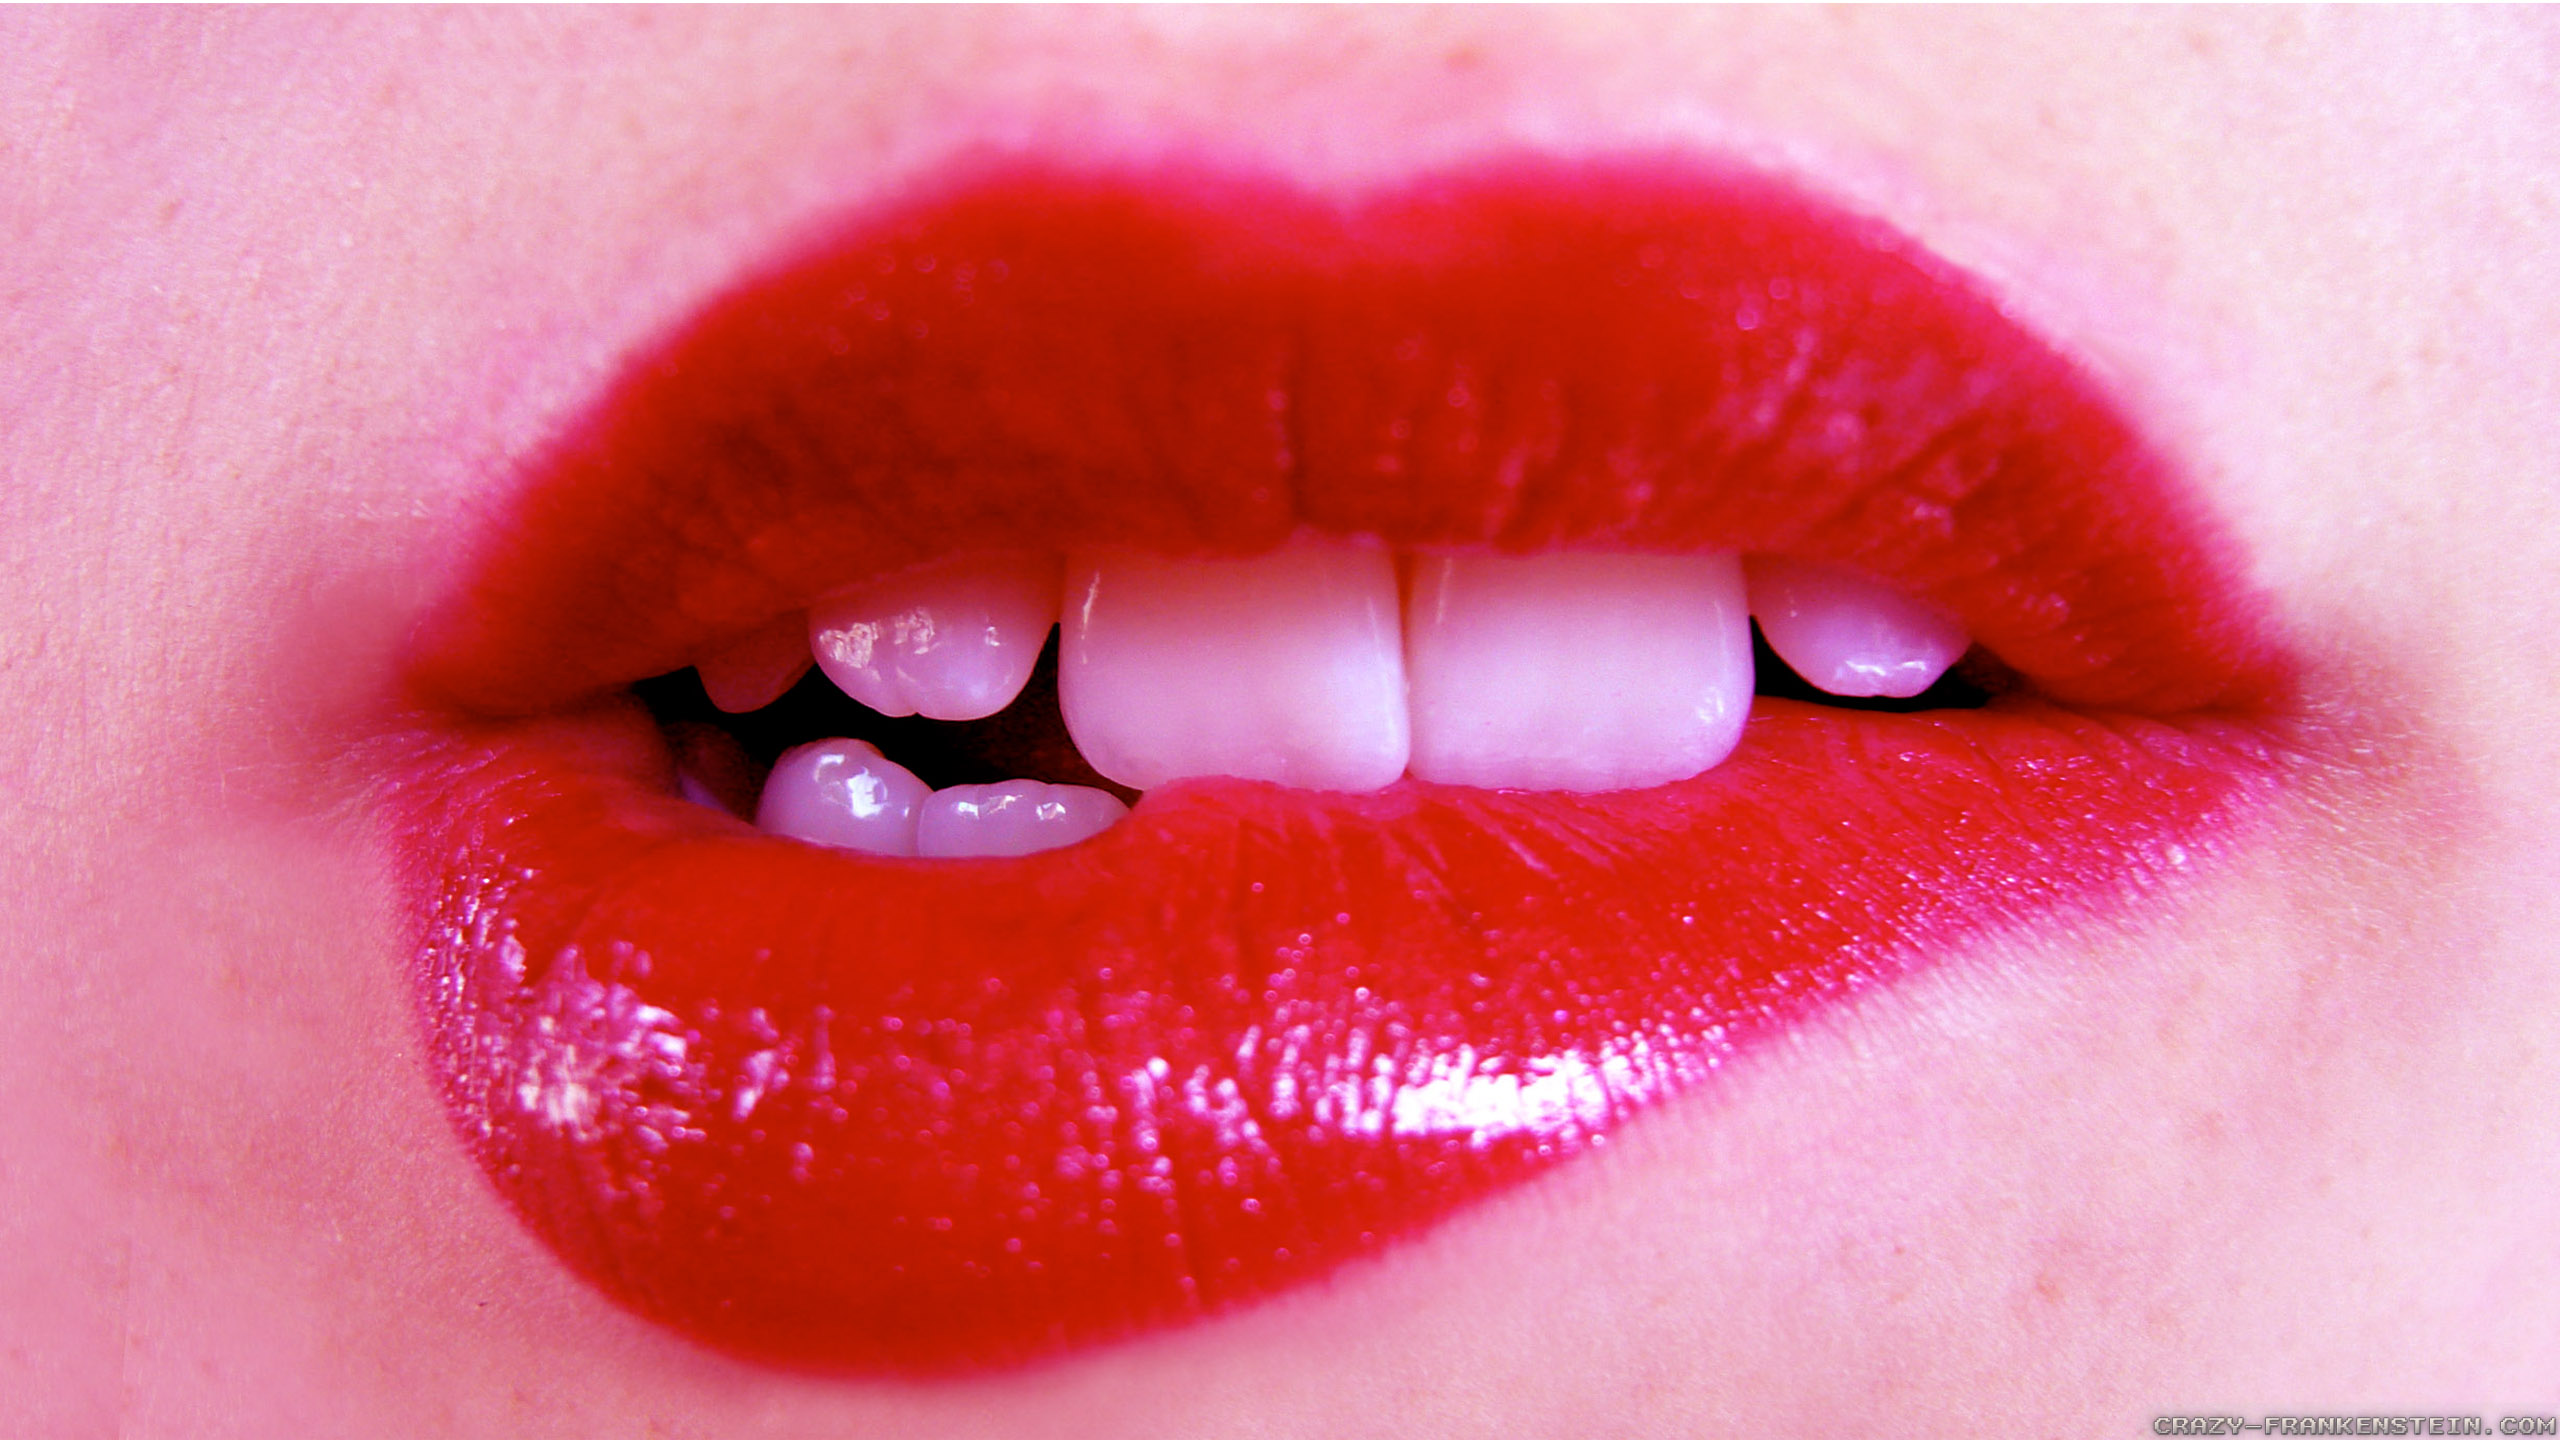 lip kiss wallpaper download,lip,mouth,red,pink,close up